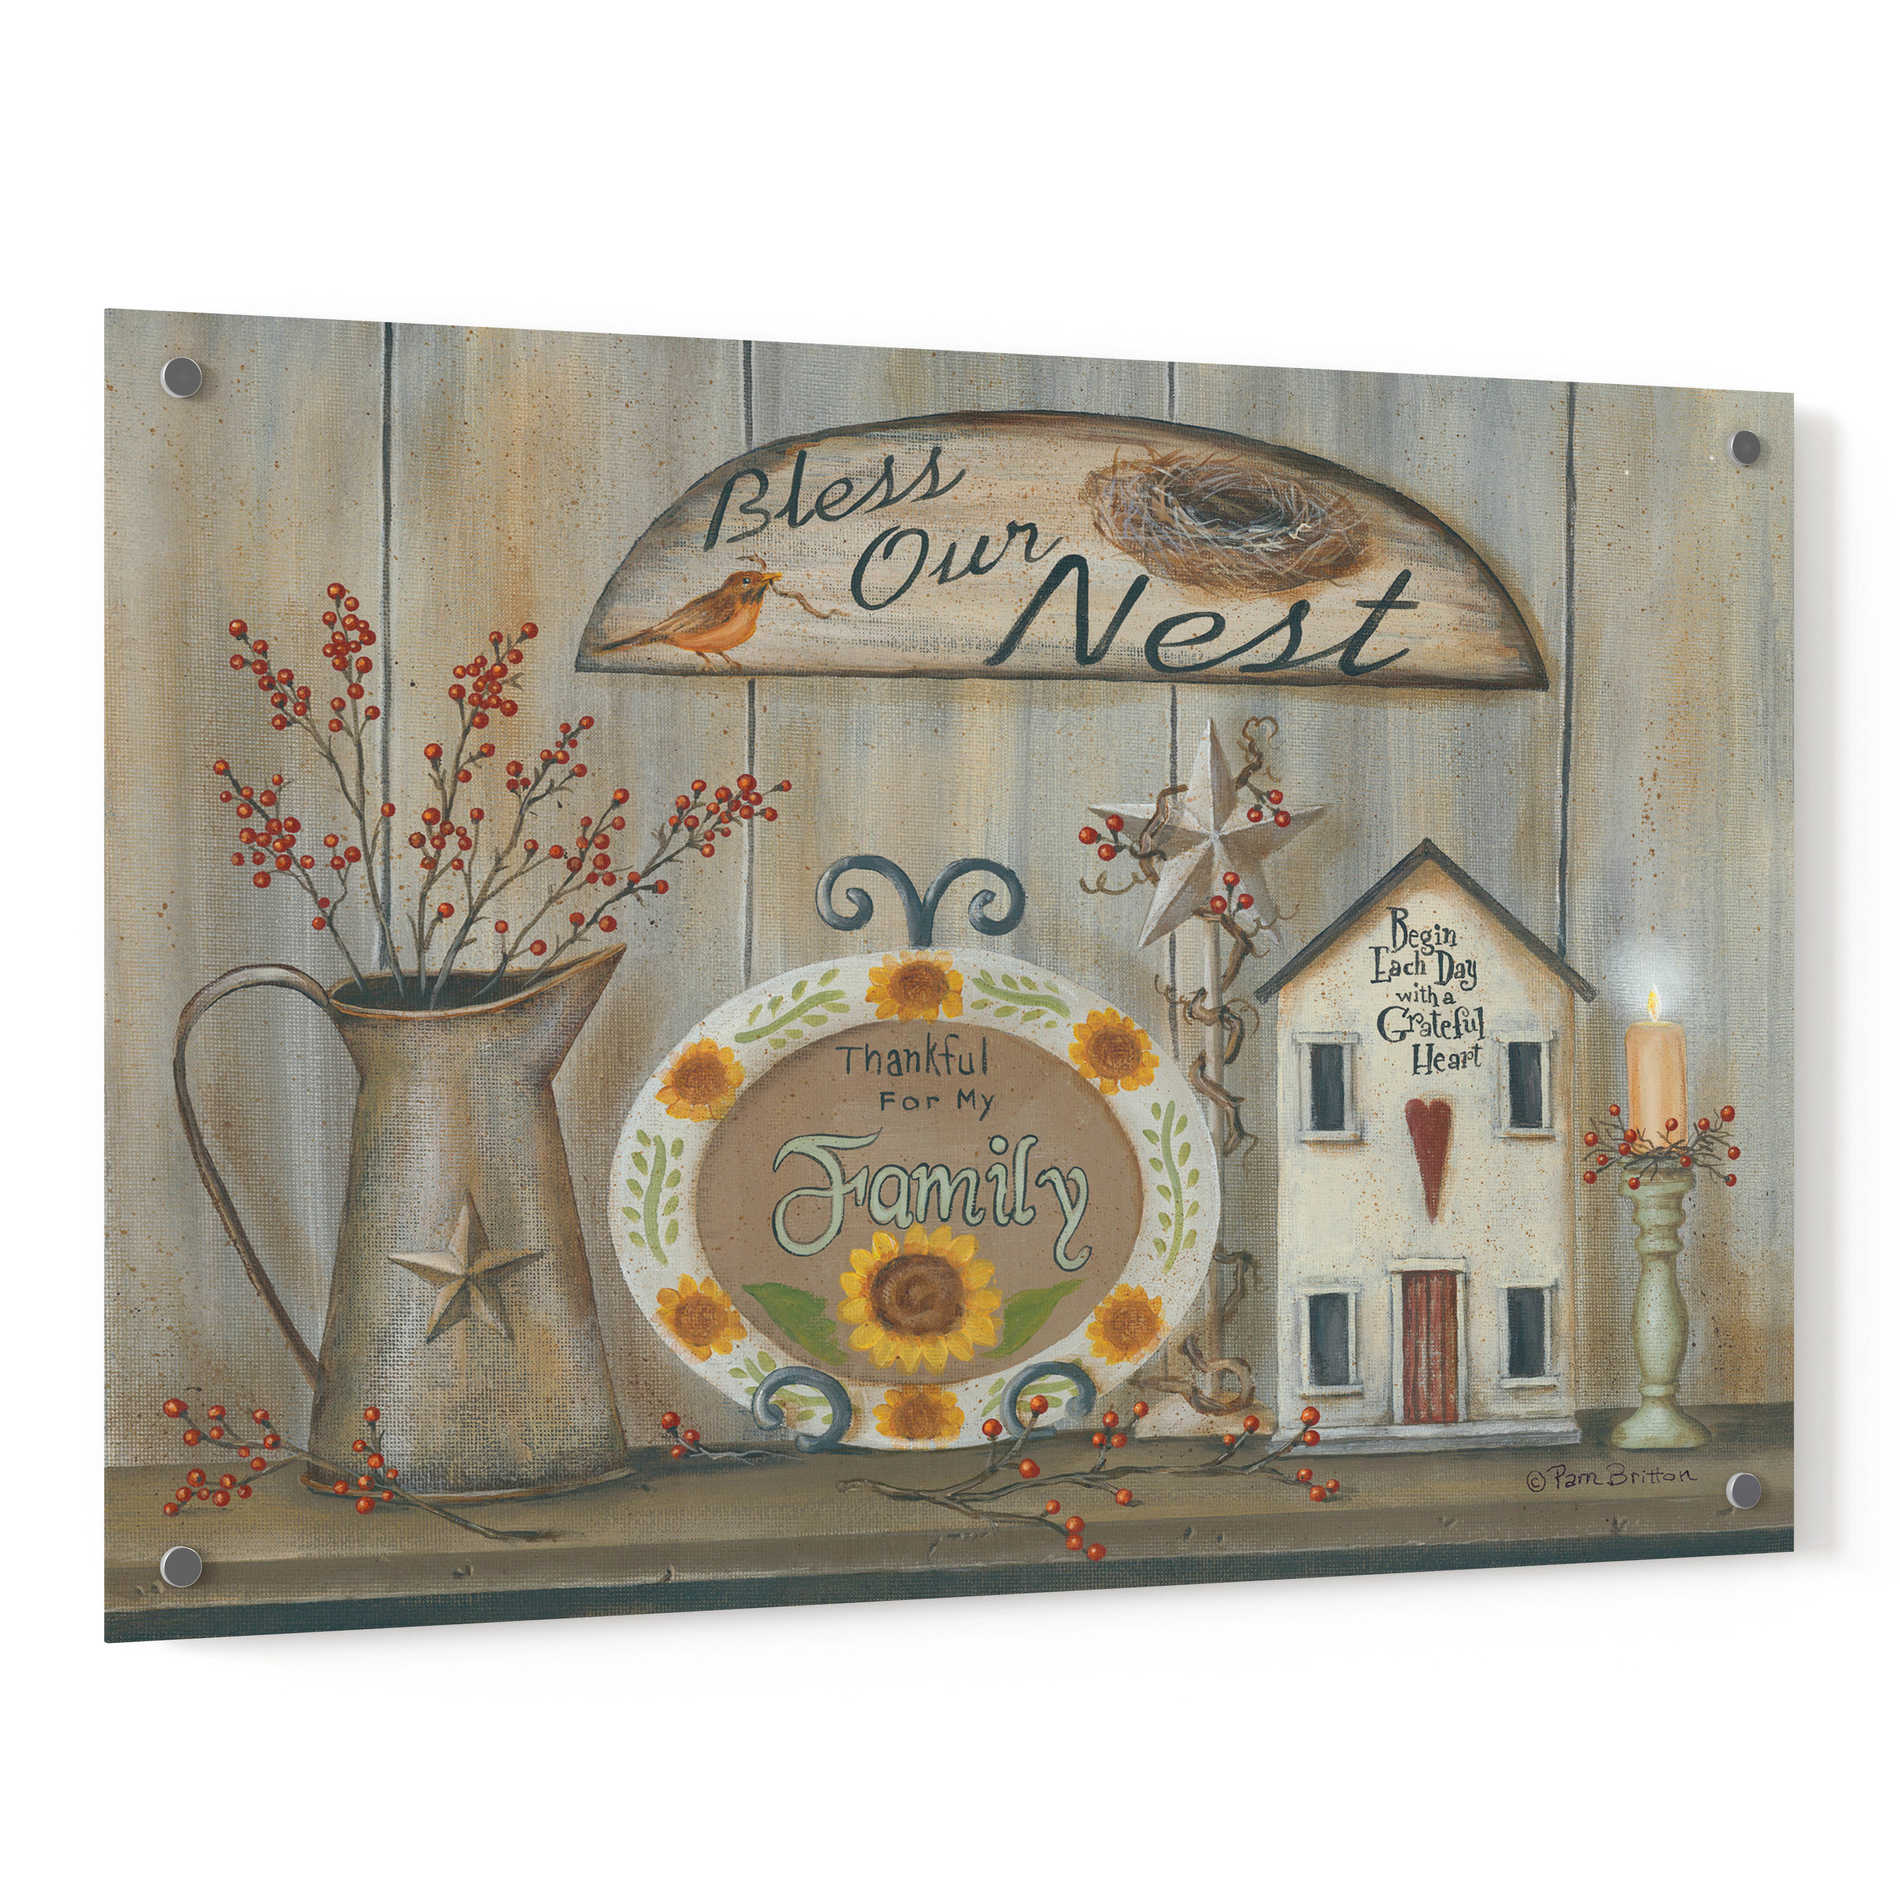 Epic Art 'Bless Our Nest Country Shelf' by Pam Britton, Acrylic Glass Wall Art,36x24